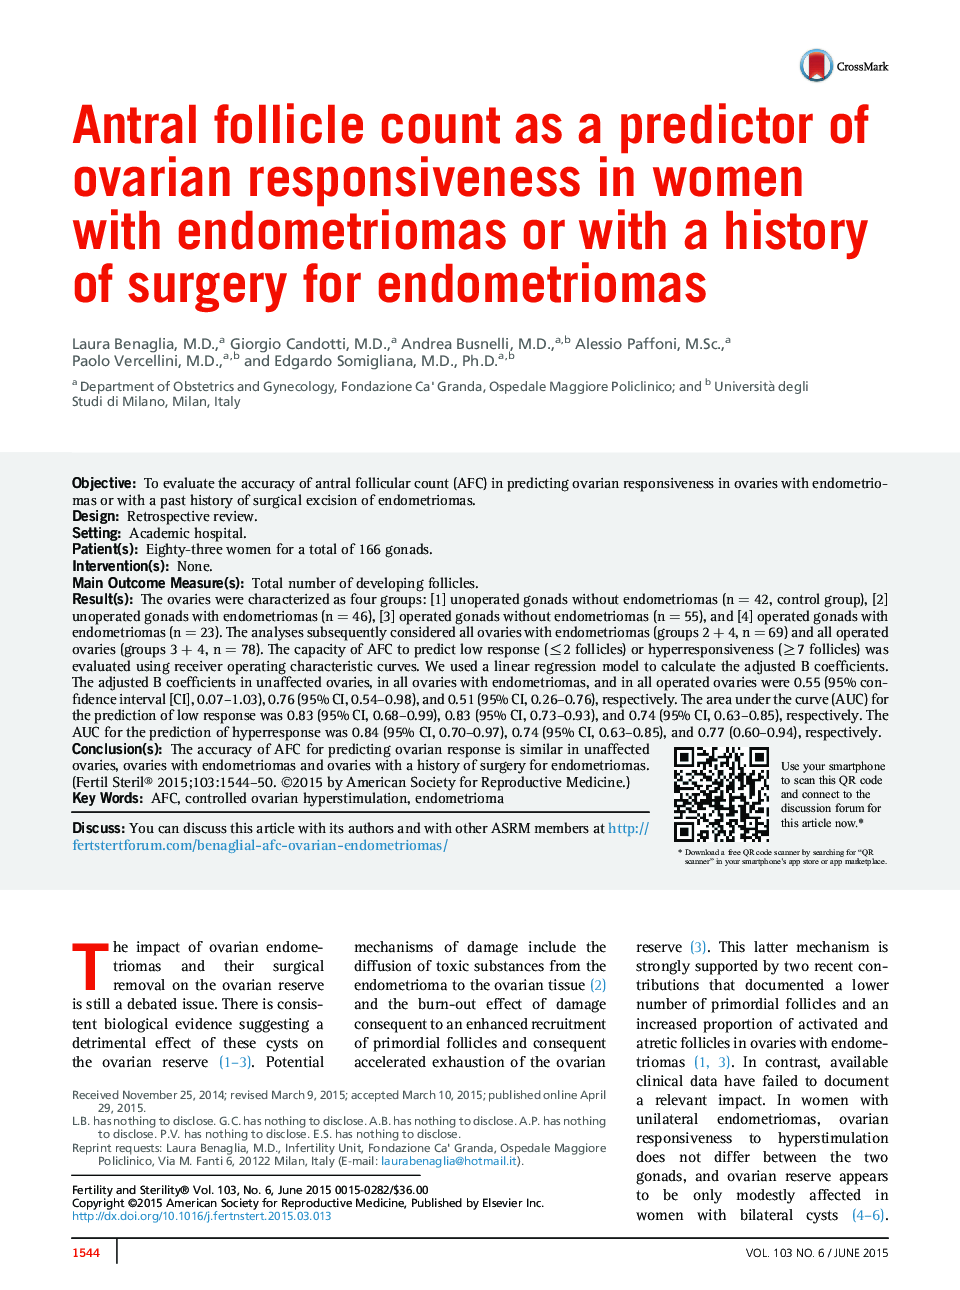 Antral follicle count as a predictor of ovarian responsiveness in women with endometriomas or with a history of surgery for endometriomas